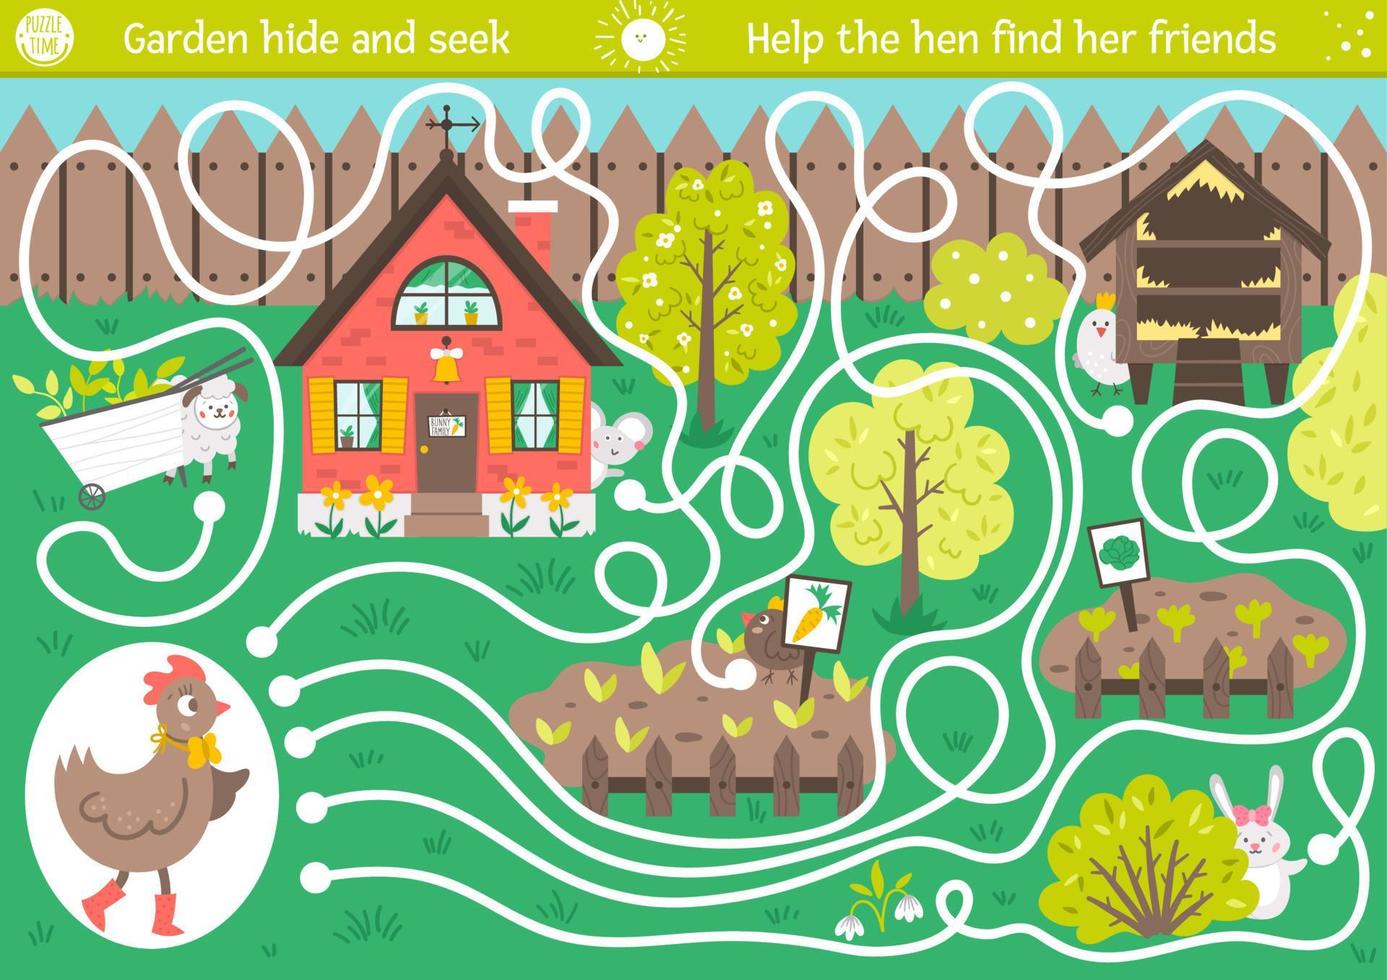 Easter maze for children. Garden hide and seek. Holiday preschool printable educational activity. Funny spring game or puzzle with cute animals. Help the hen find her friends. vector